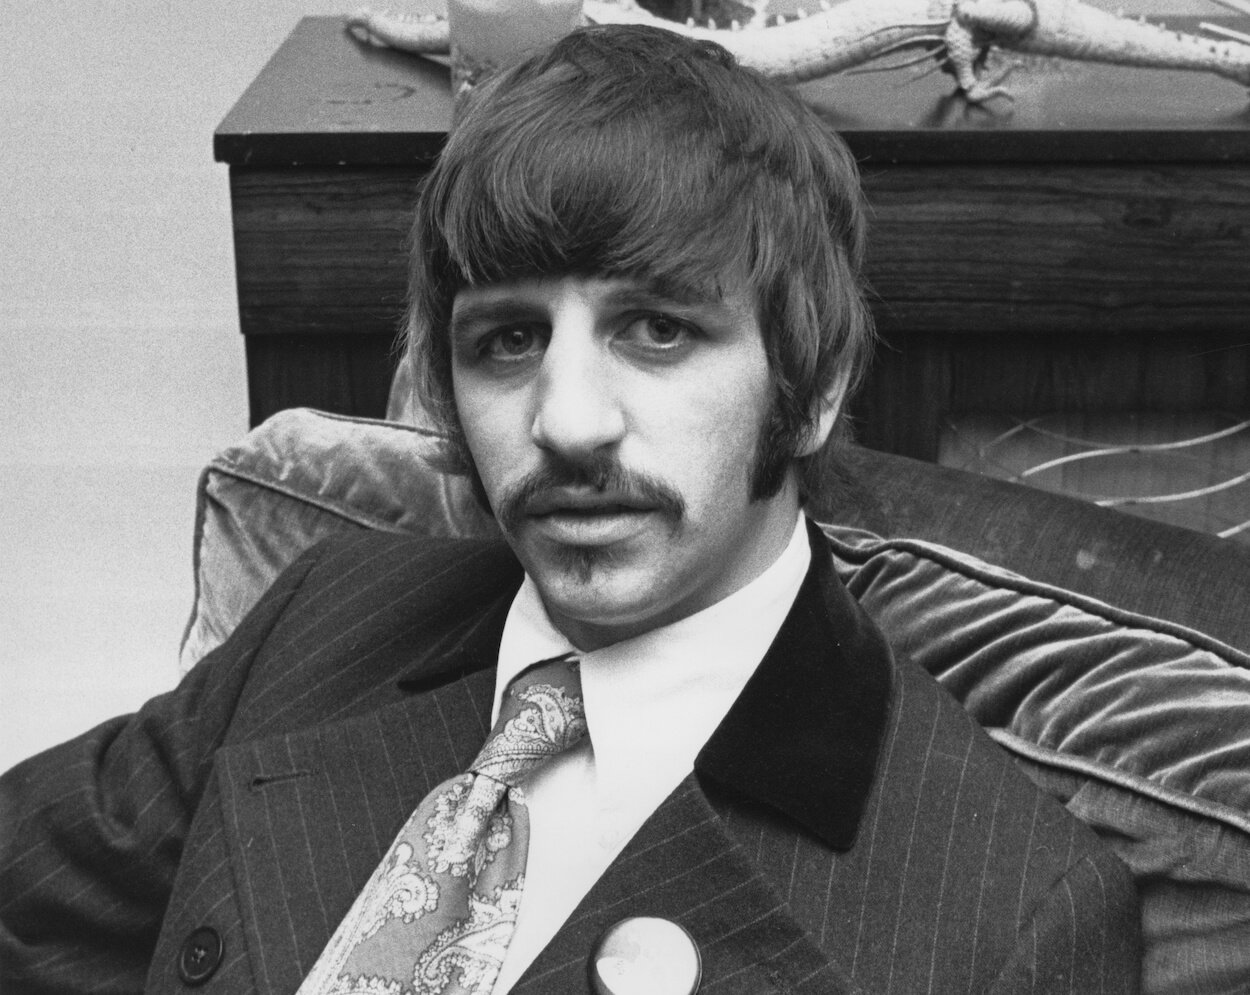 Beatles drummer Ringo Starr wearing a pinstriped suit and sporting a mustache while sitting in an easy chair in 1967.